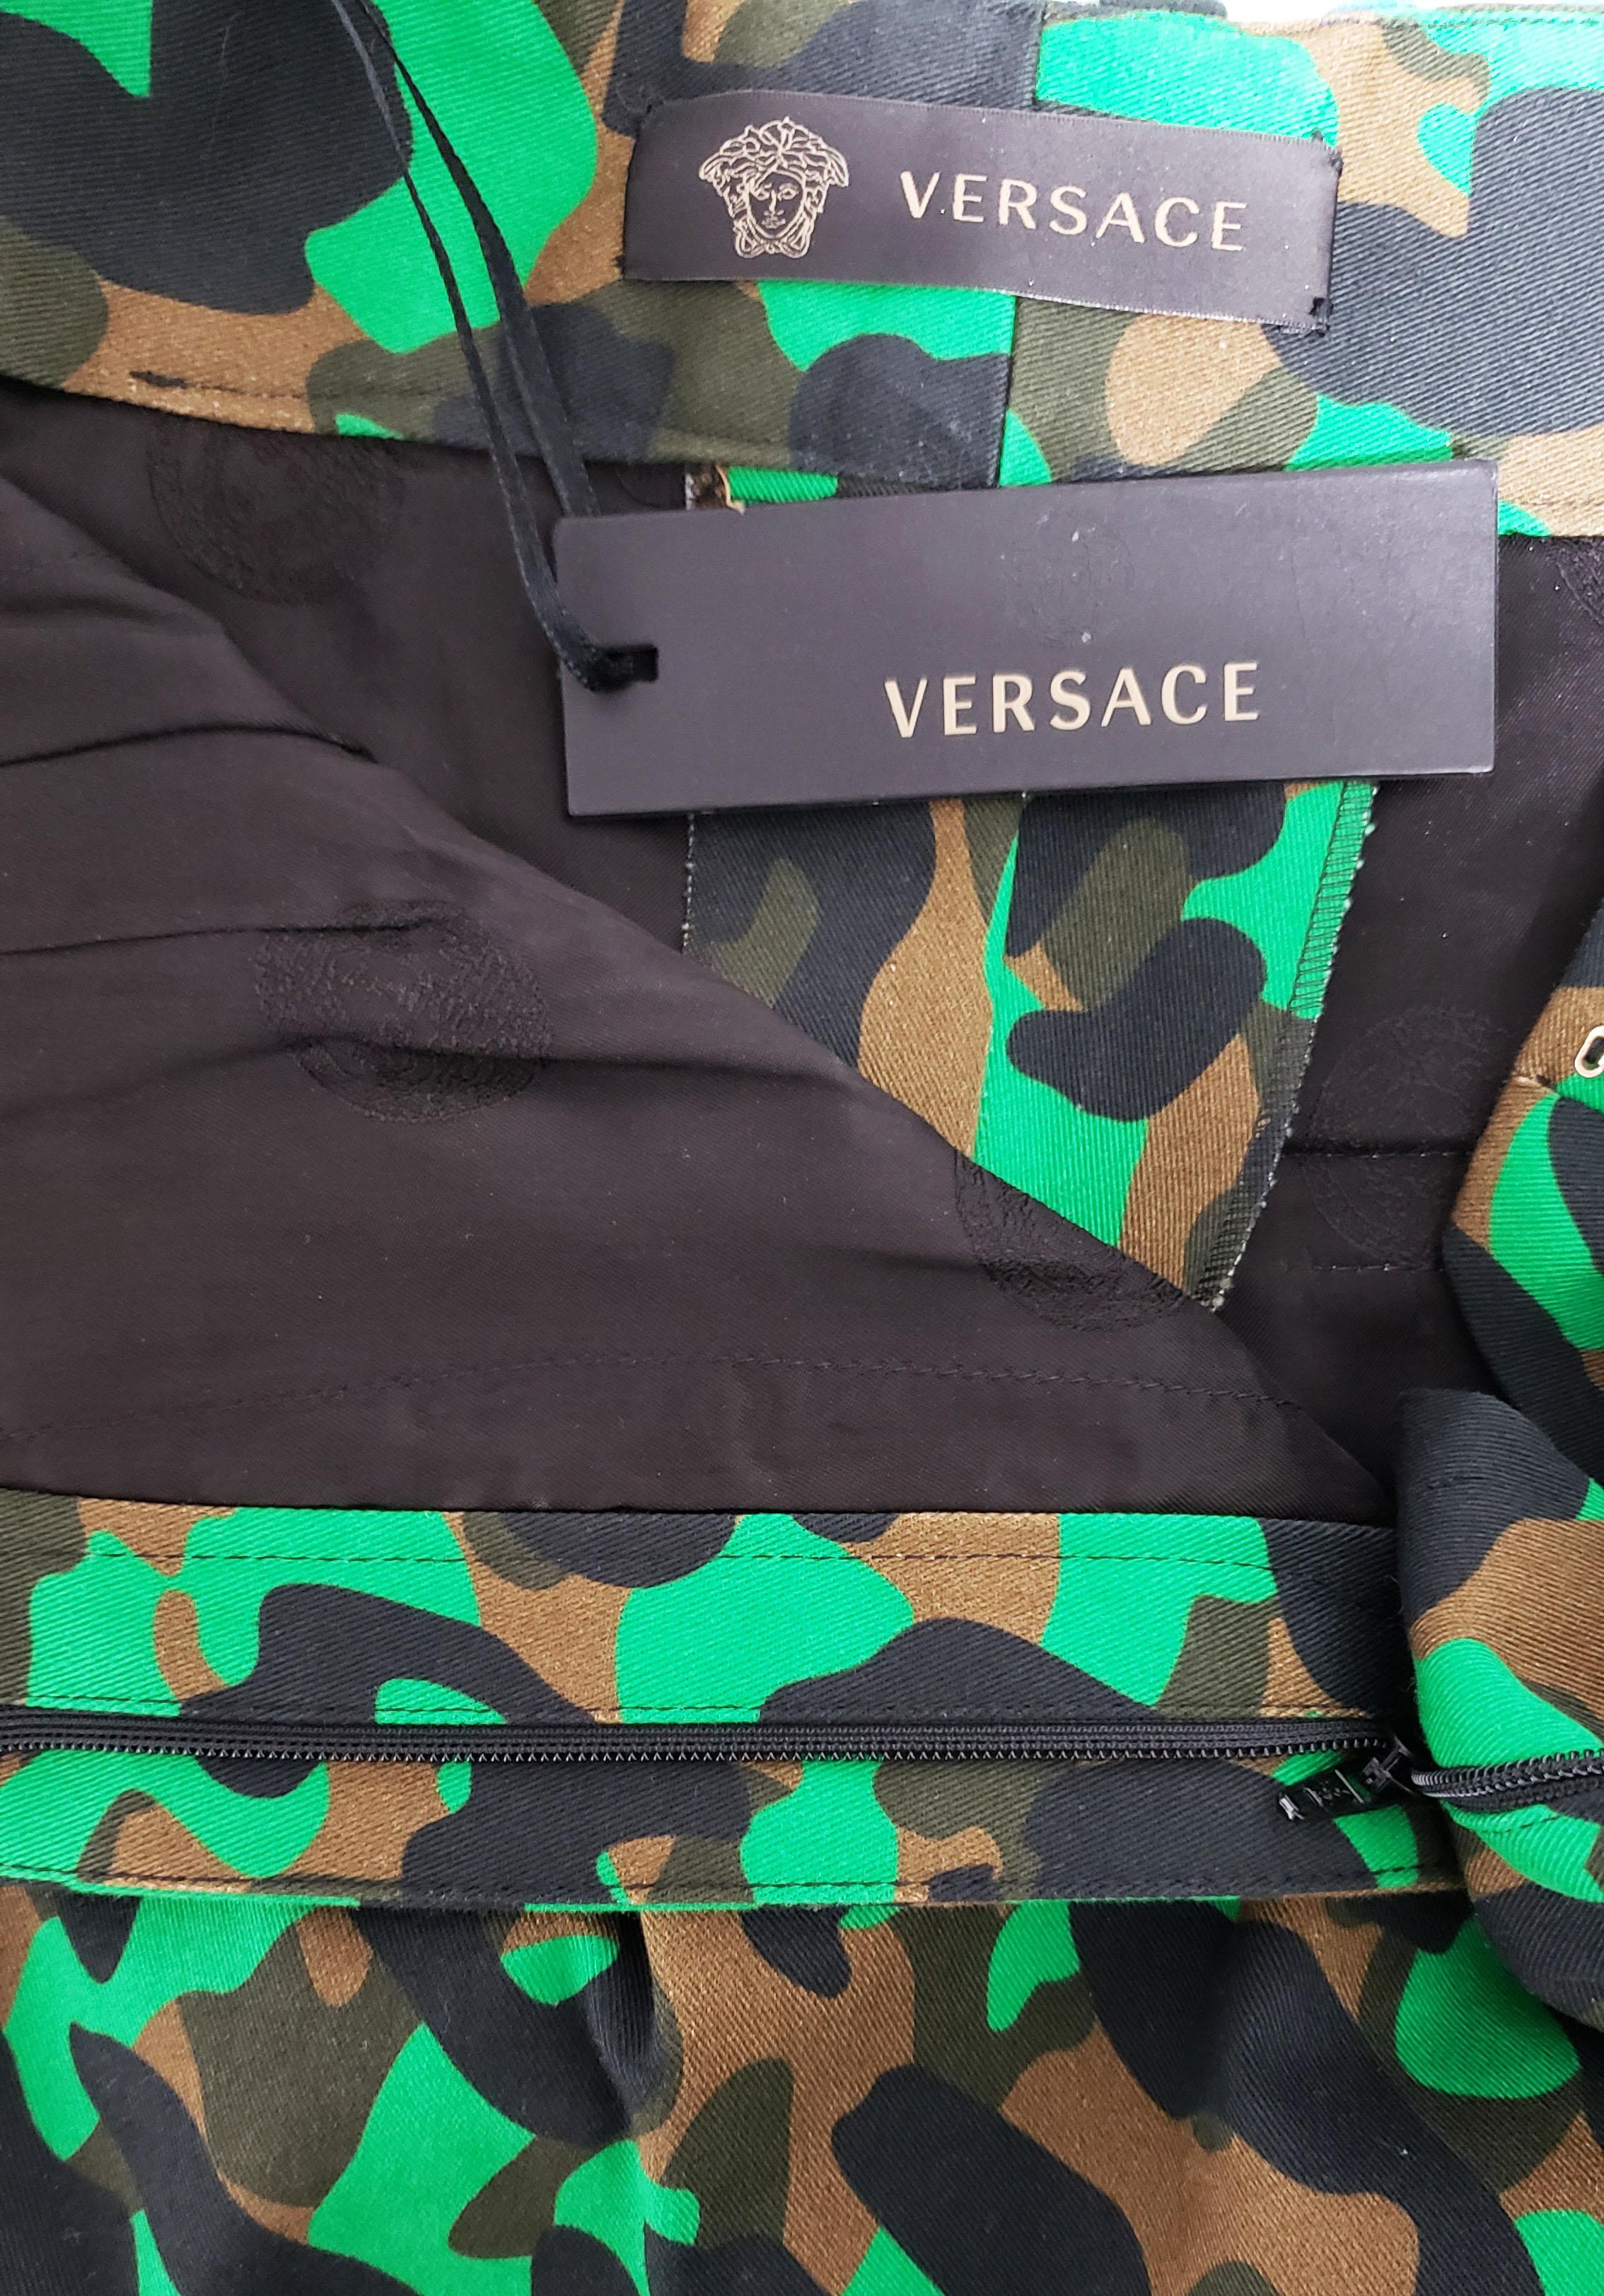 S/S 2016 Look # 12 NEW VERSACE MILITARY CAMOUFLAGE PRINTED SHORTS 42 - 6 For Sale 3